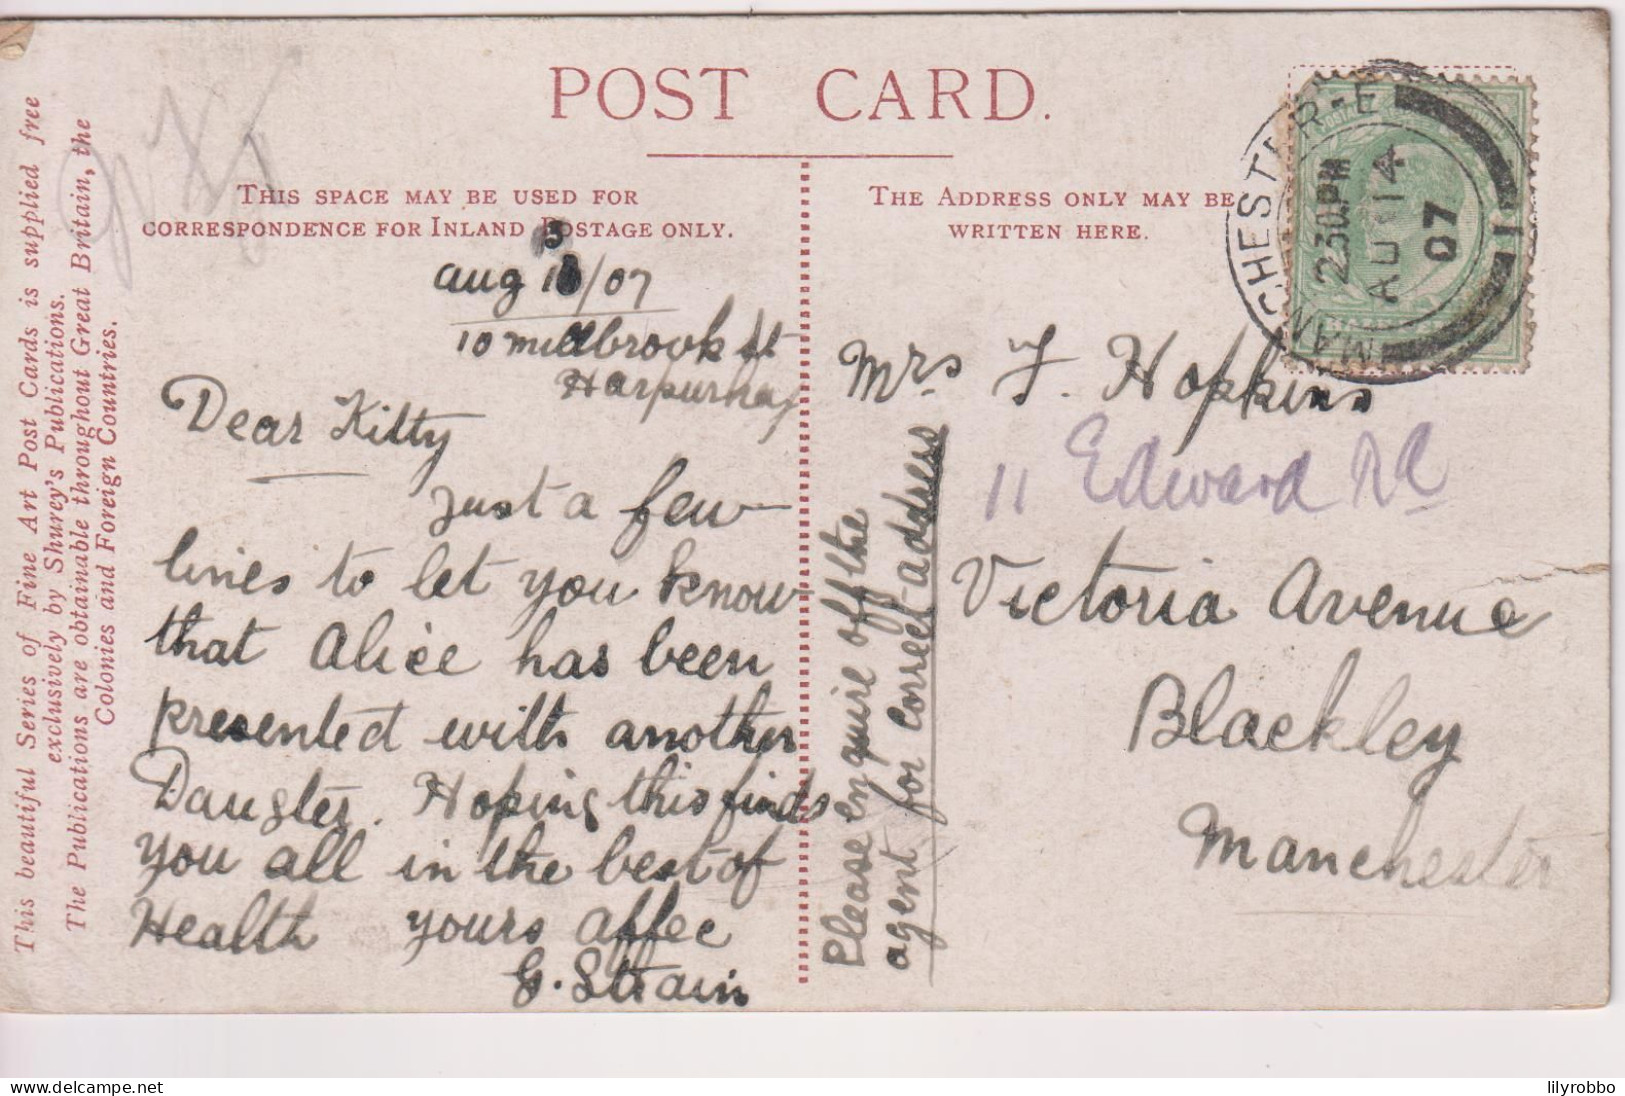 UK - Scotland - Forth (Railway) Bridge With Ferry In The Foreground Etc - Manchester UK Postmark 1907 - Ouvrages D'Art